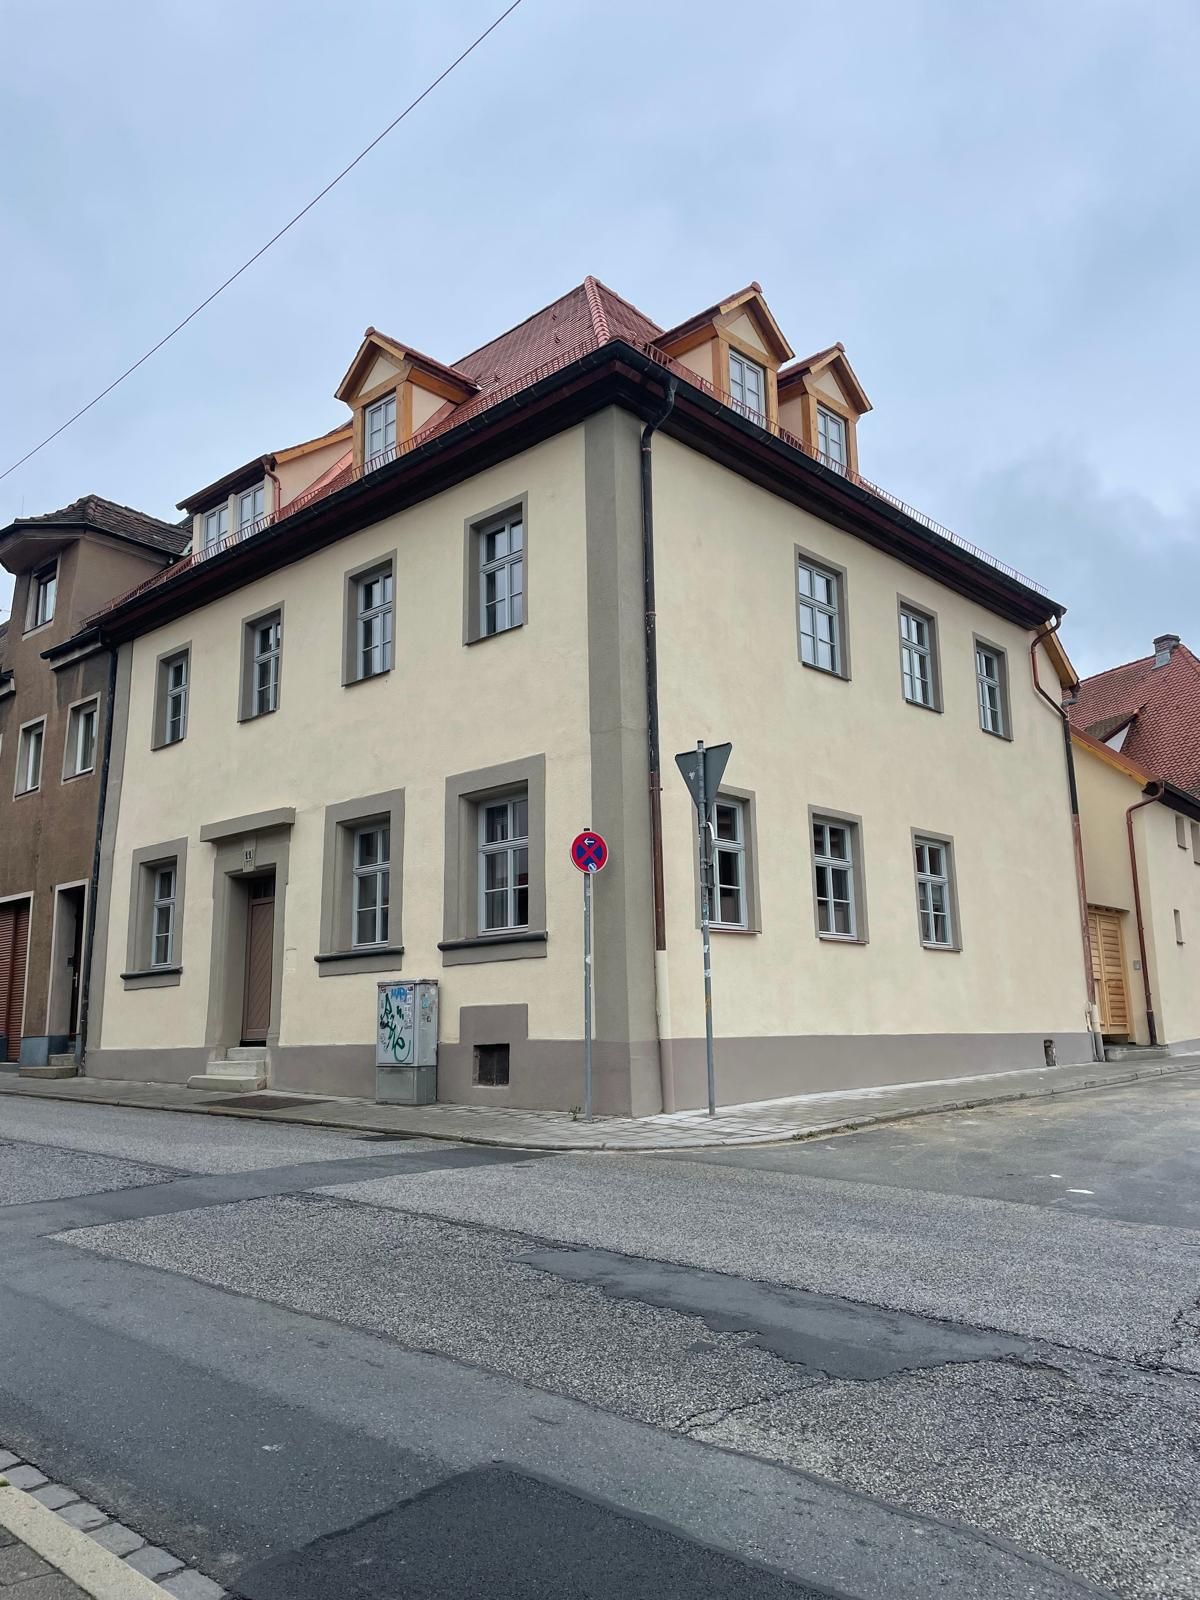 Small but nice: Charming 1-room apartment, first occupancy, fully furnished, contract with extension option, central, old town Erlangen